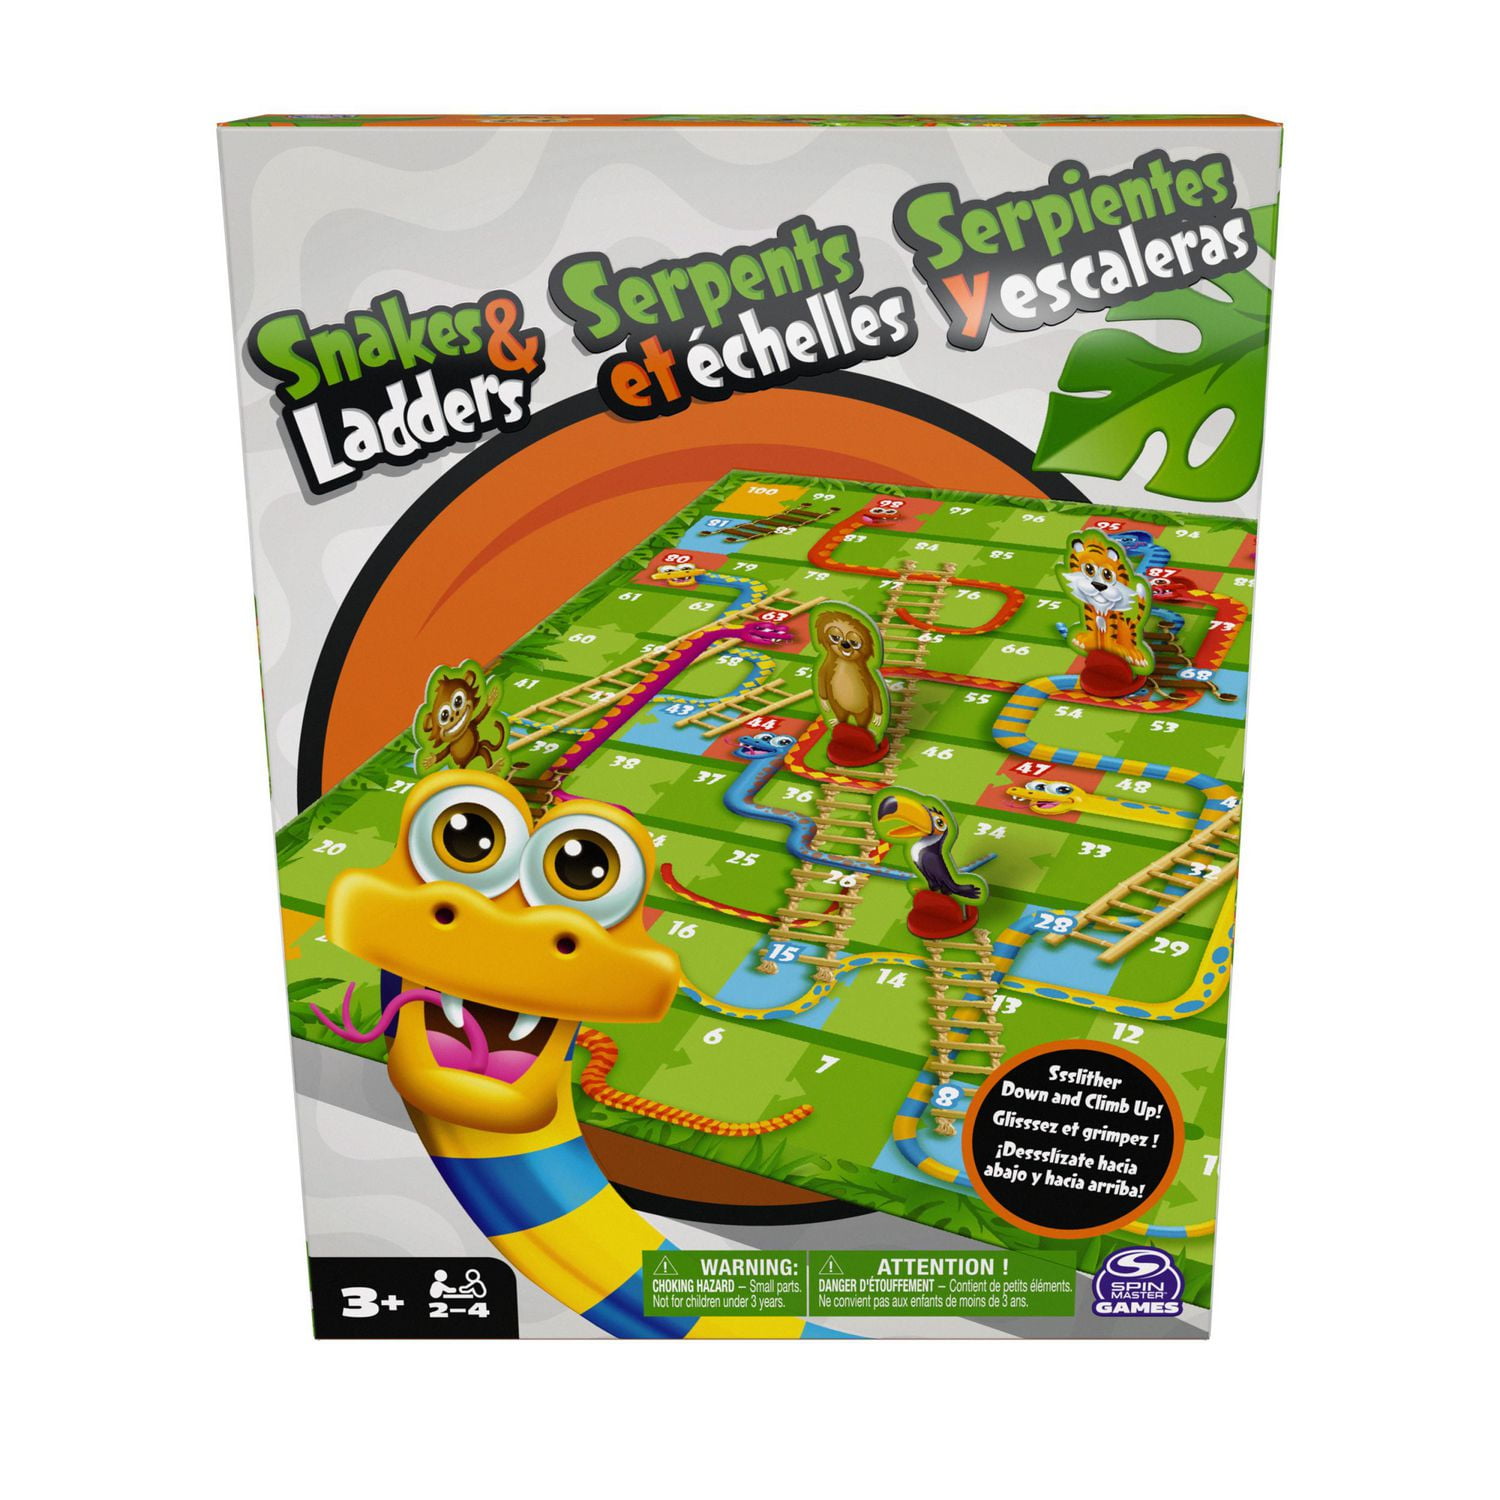 Spin Master Games, Snakes & Ladders Game for Kids Colorful 2-4